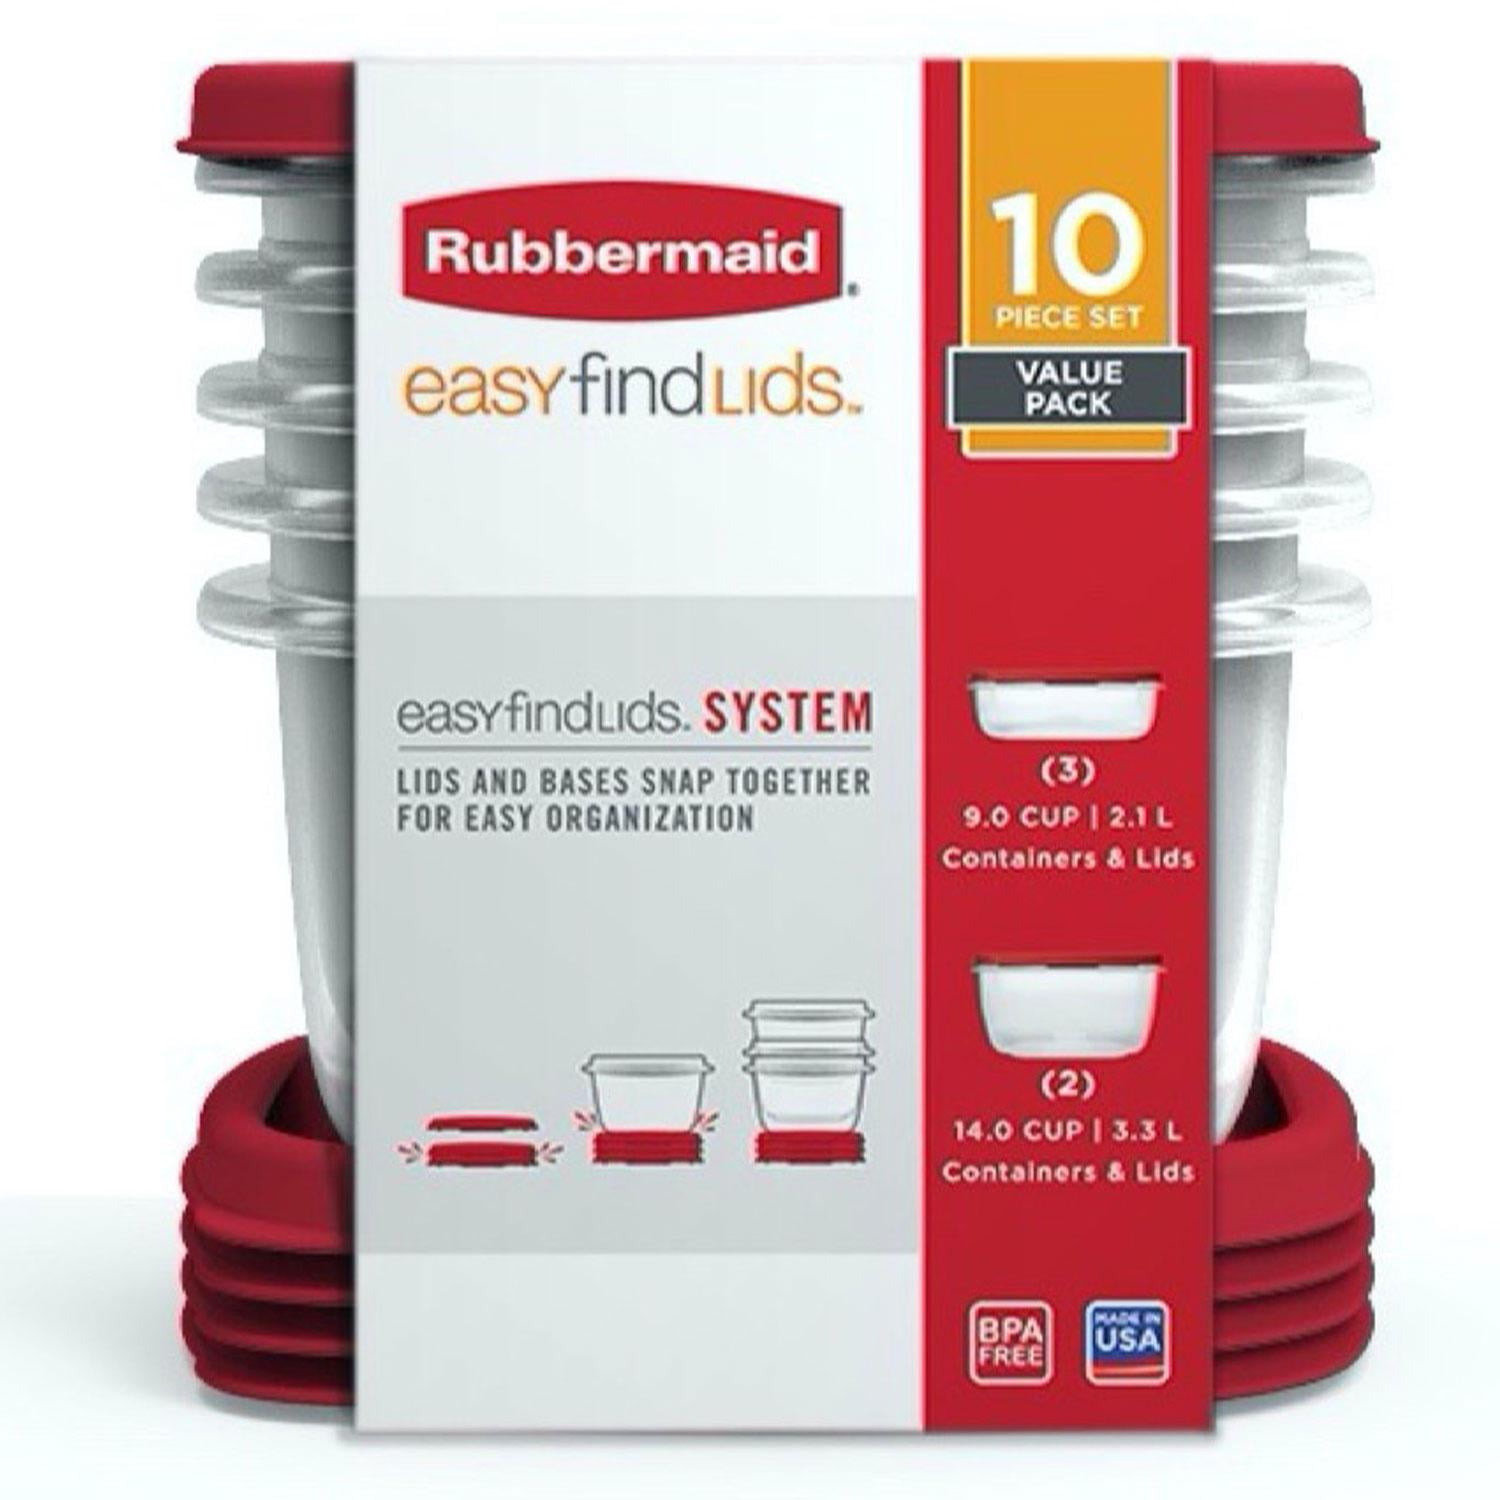 Rubbermaid 10-Piece Food Storage Containers for sale online 